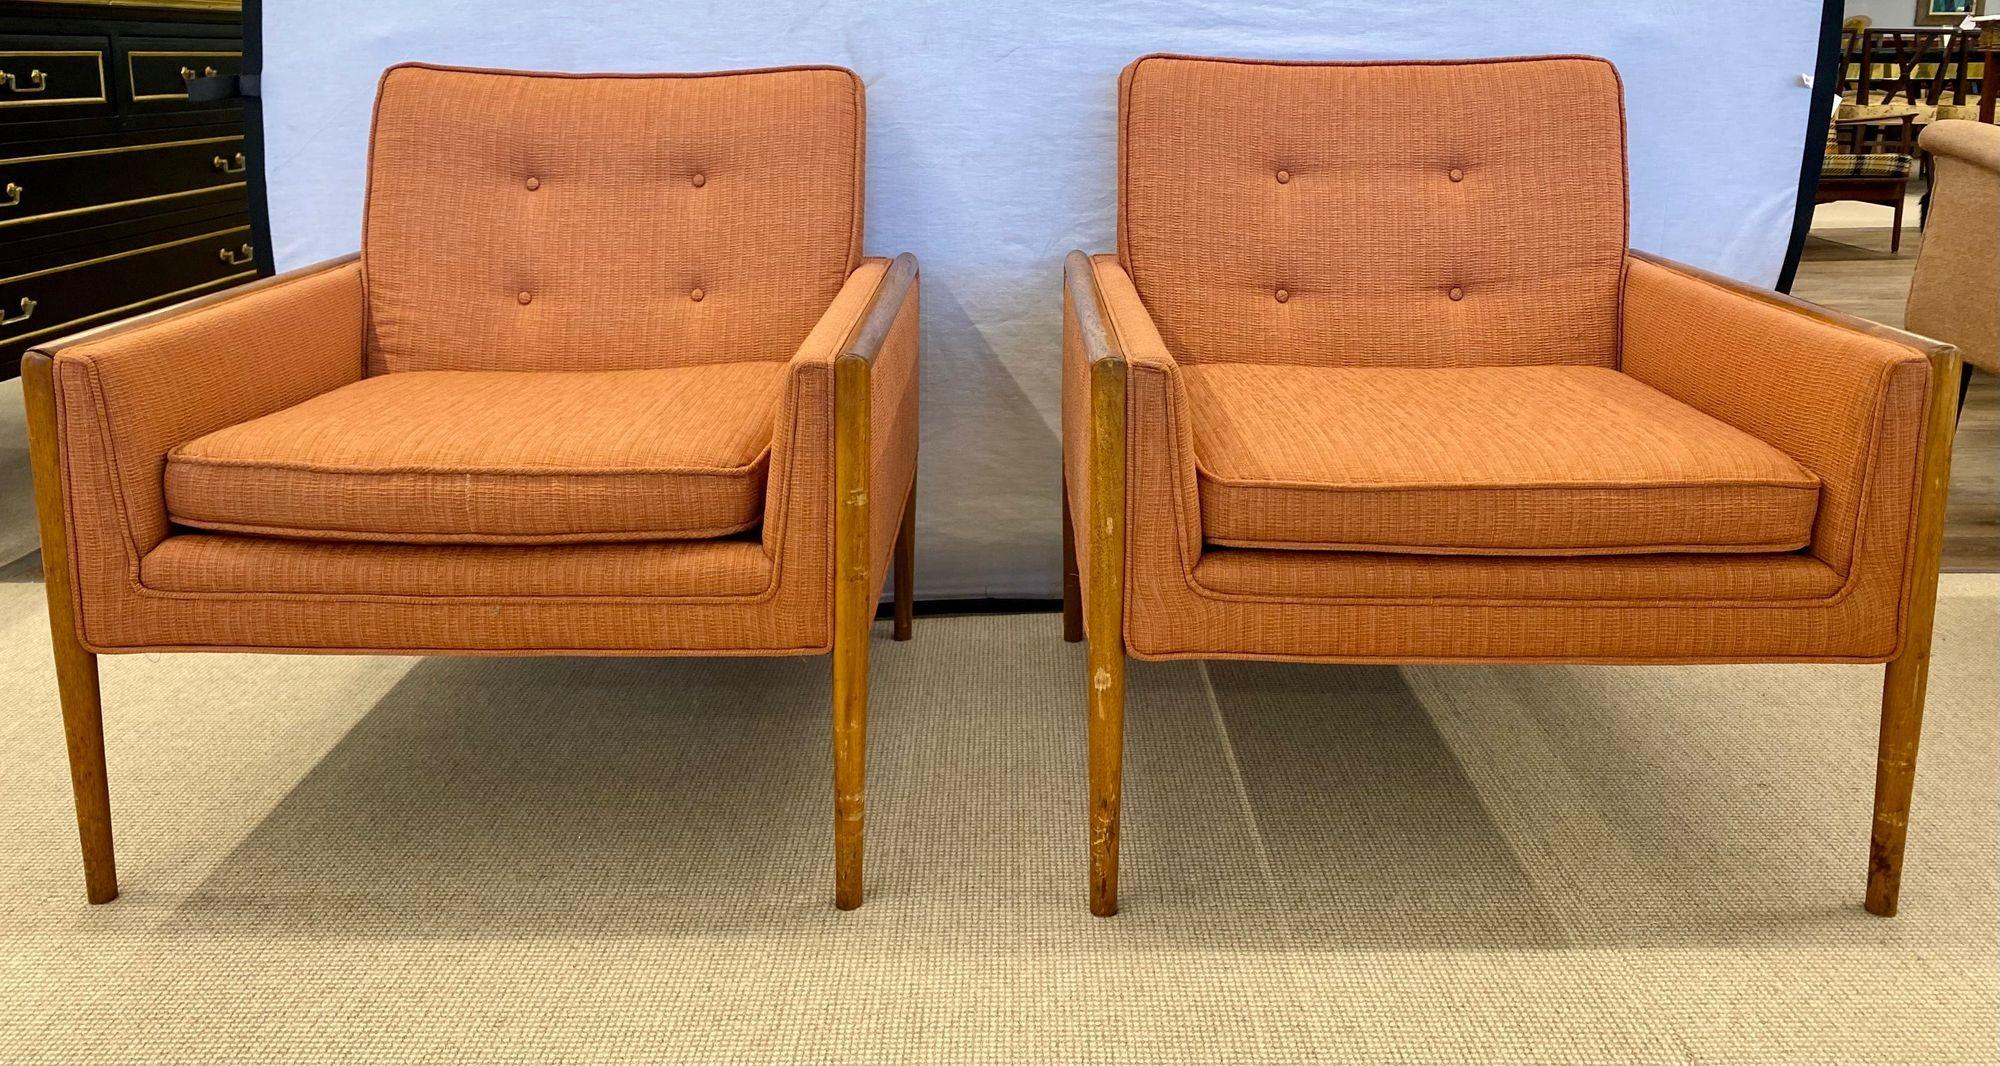 Pair of Mid-Century Modern Lounge Chairs, American, Walnut, 1960s For Sale 1